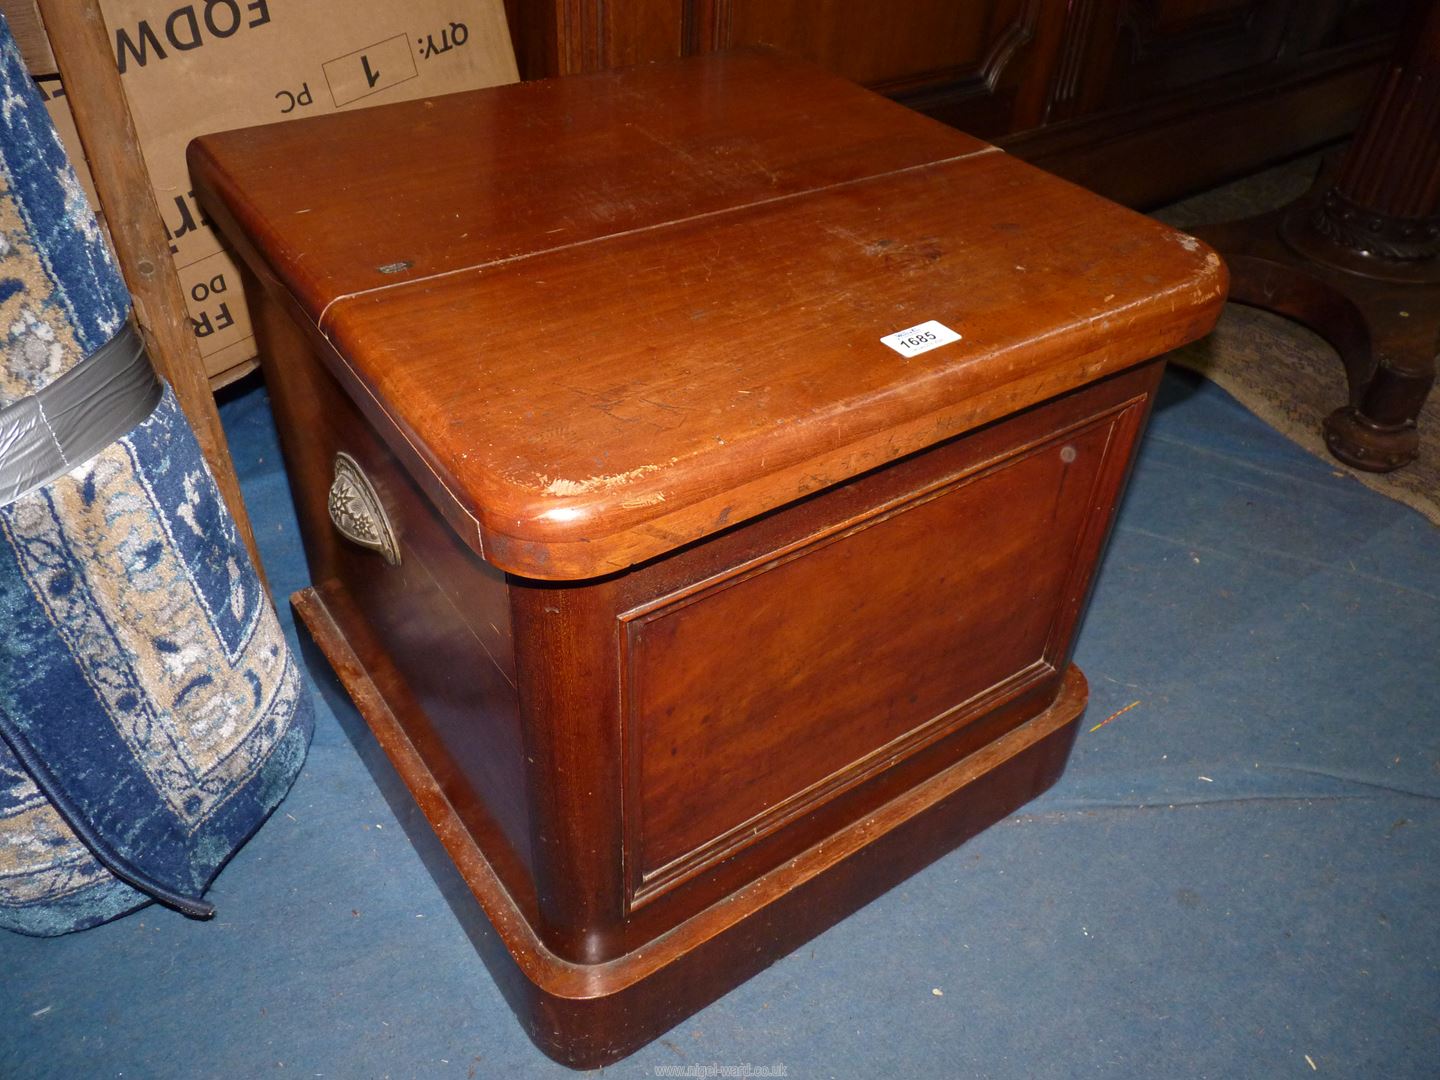 A Mahogany box Commode, unfurnished, 19'' wide x 19 1/2'' deep x 17 3/4'' high approx.